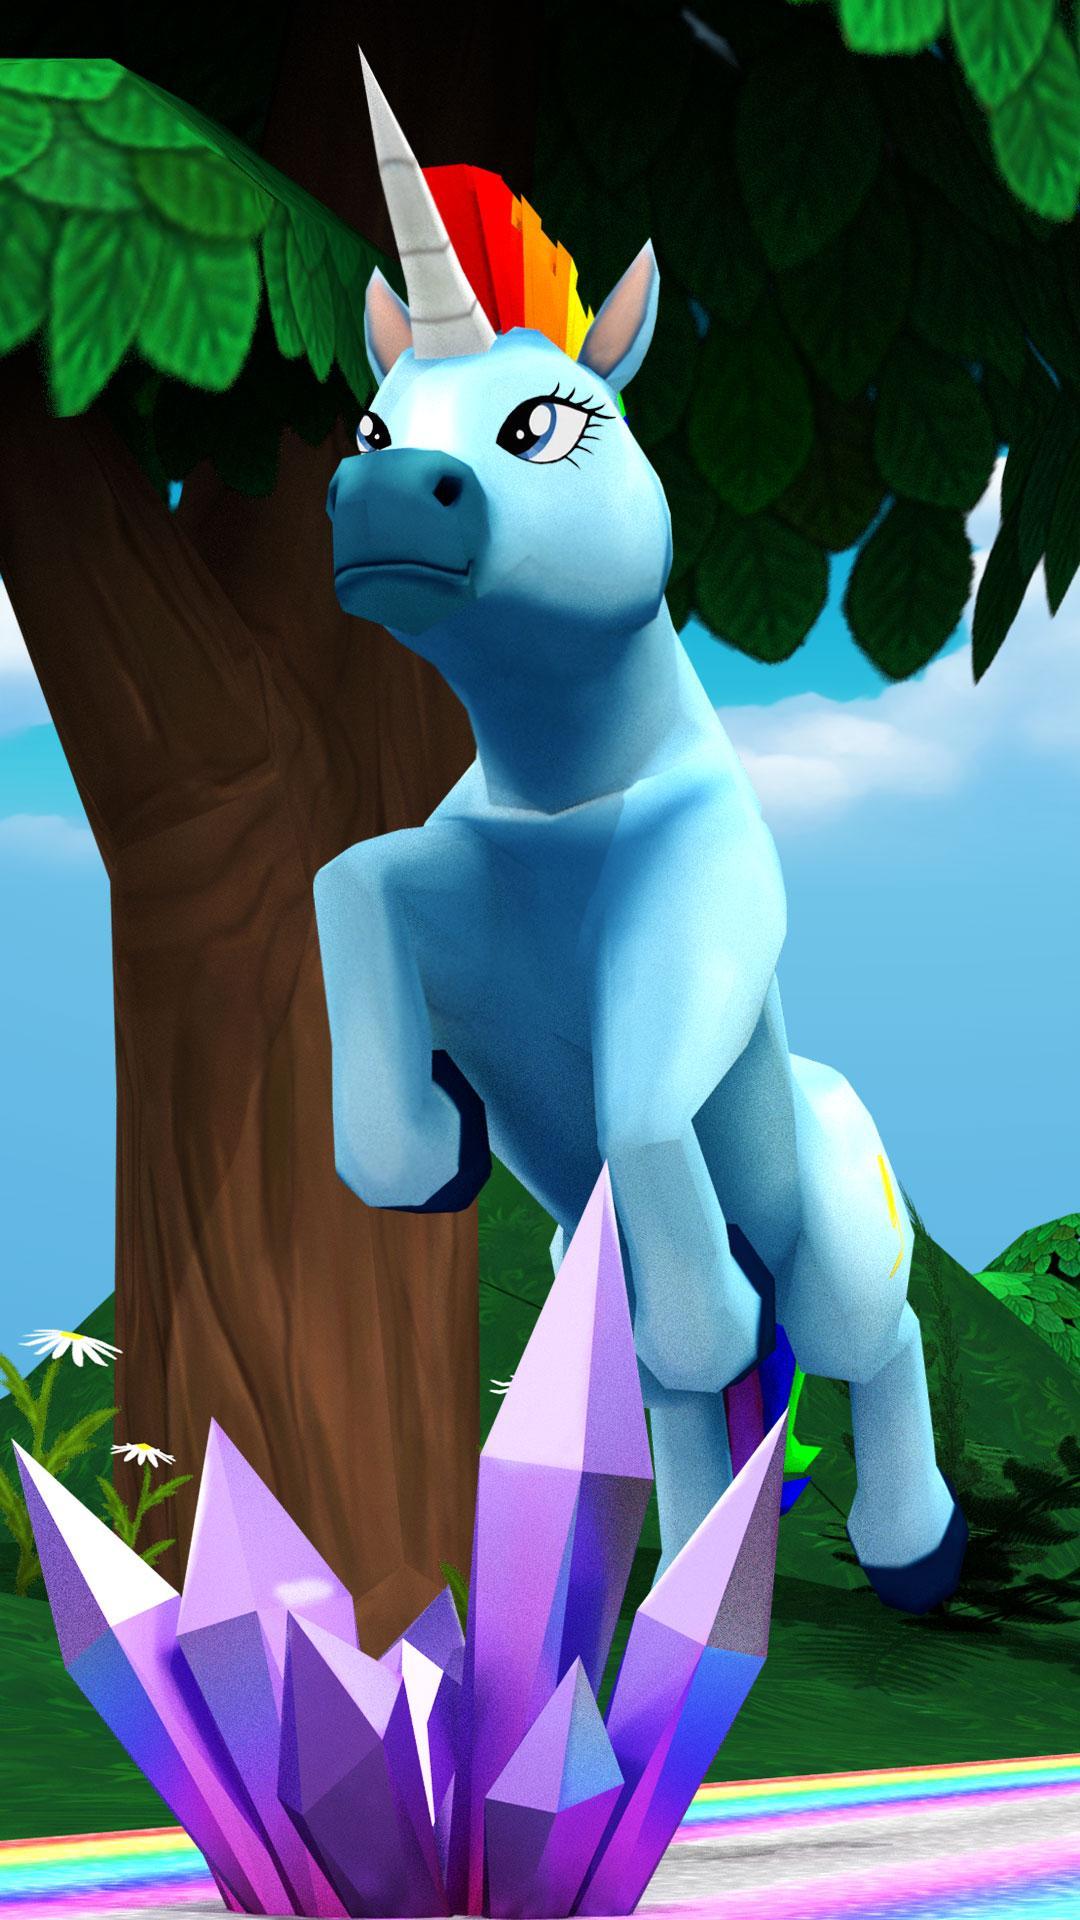 Unicorn Runner Jungle for Android - APK Download